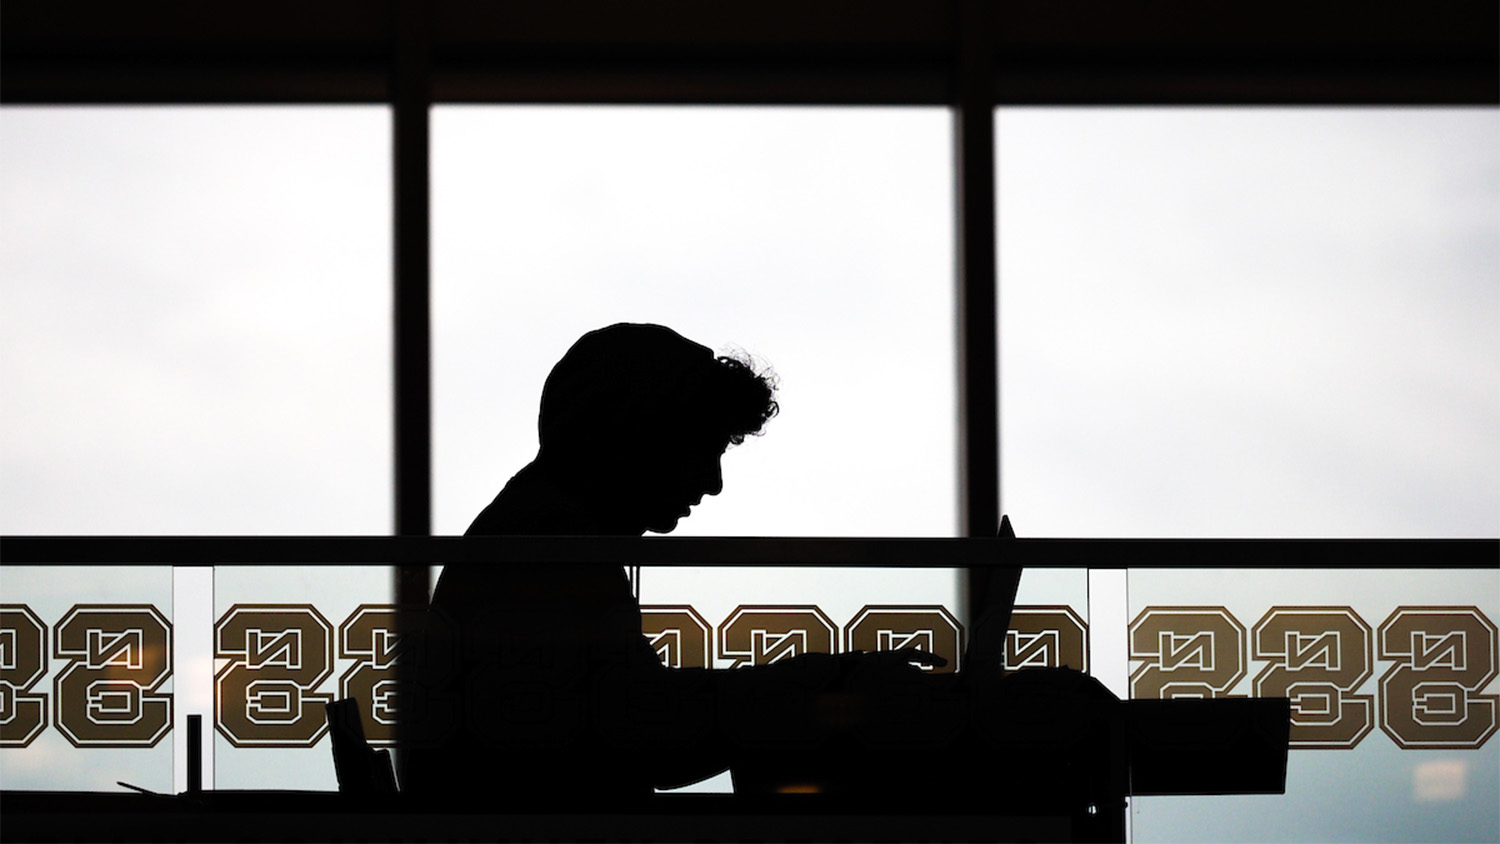 Silhouette of a student studying by a large window with NC State logos along the bottom